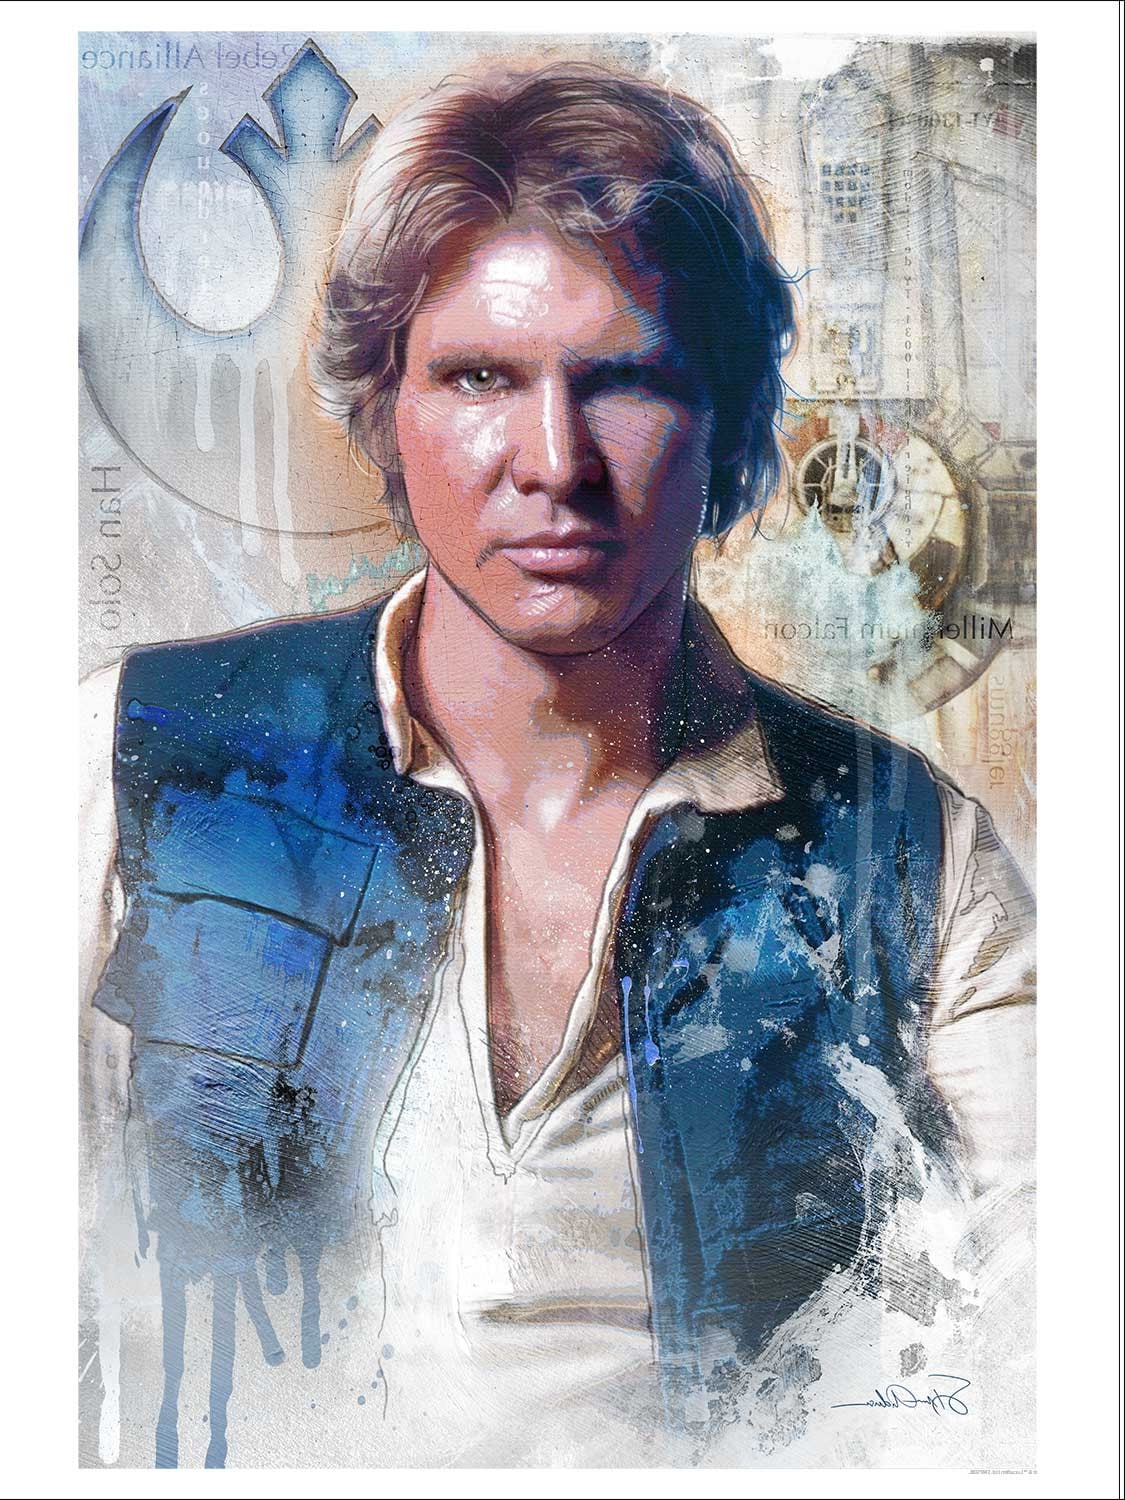 Han Solo, Join The Alliance, Star Wars, one person, front view